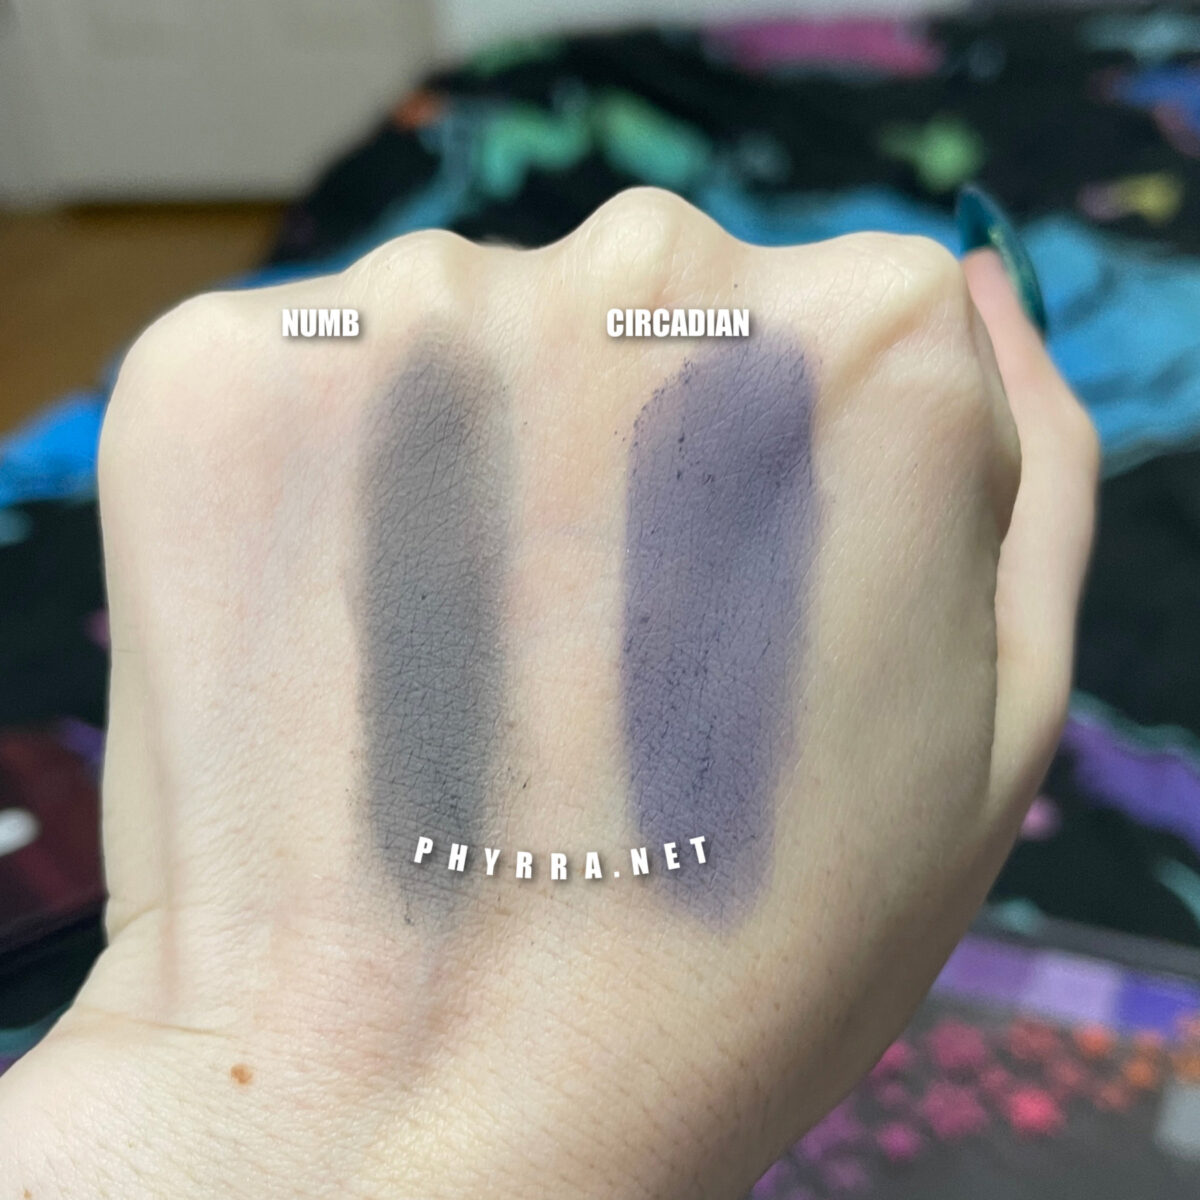 Lethal Numb vs. Circadian swatched on very fair skin